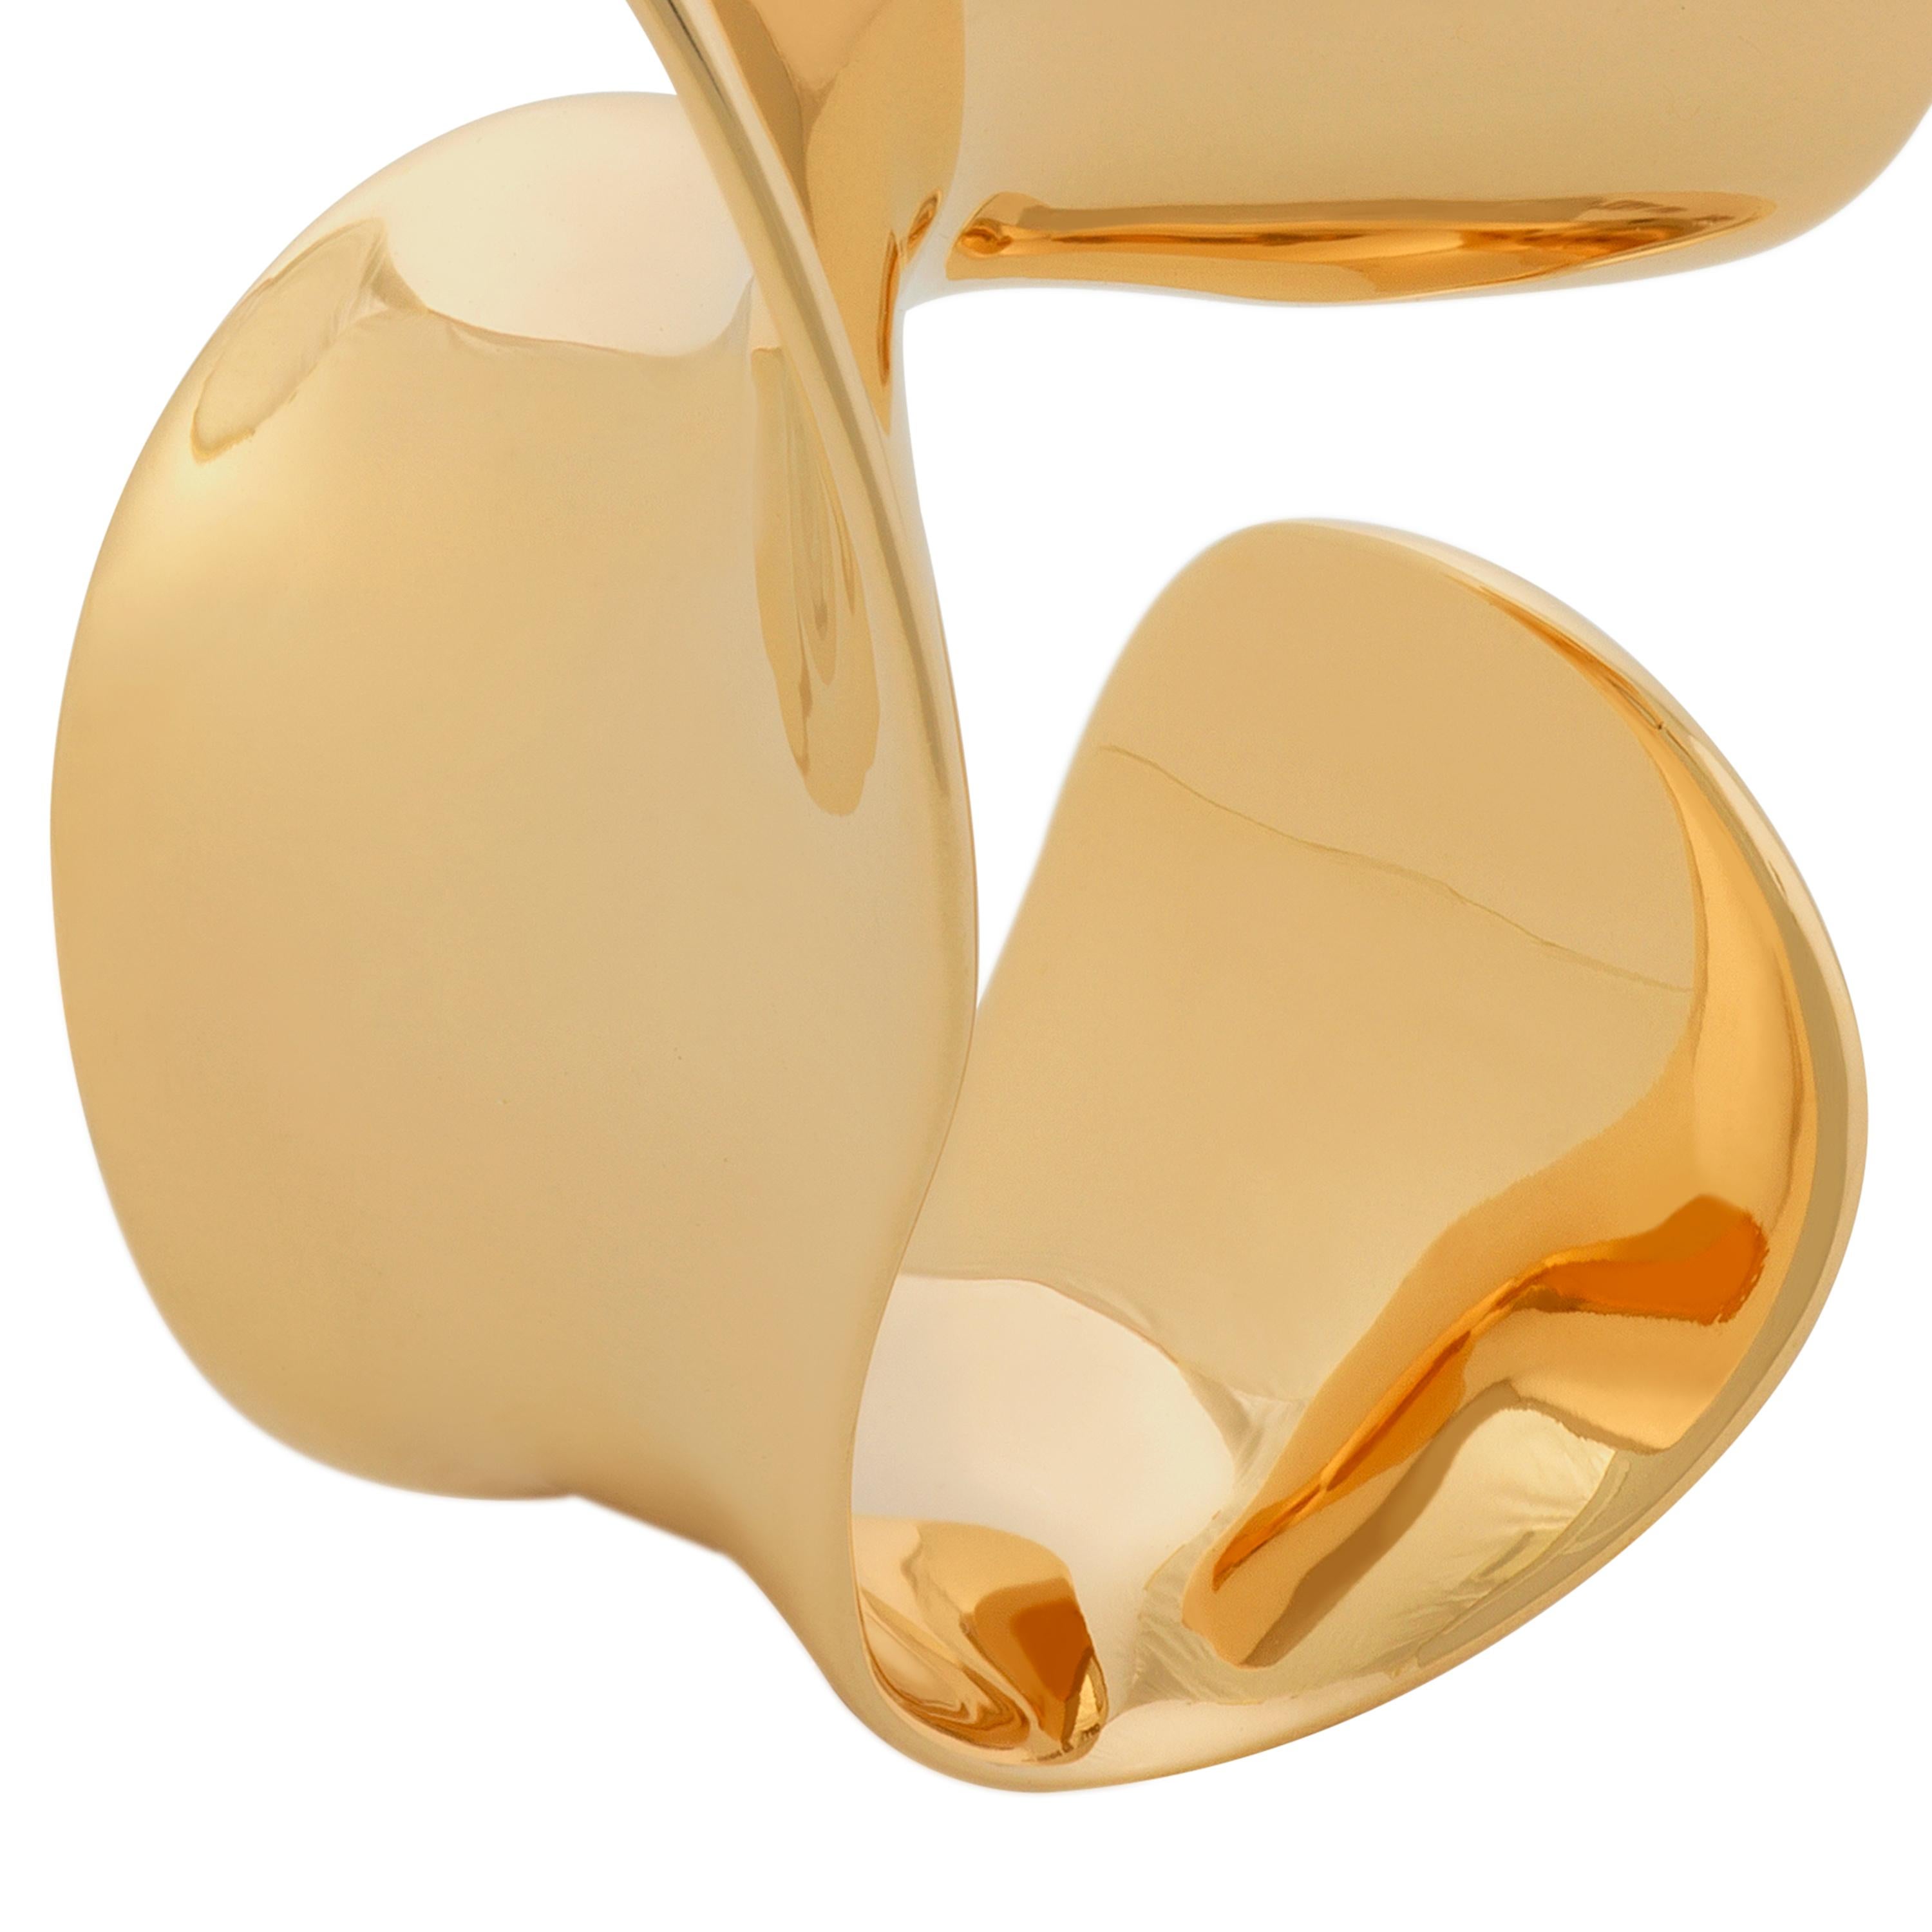 Nathalie Jean Contemporary Limited Edition 18 Karat Gold Sculpture Cocktail Ring For Sale 1